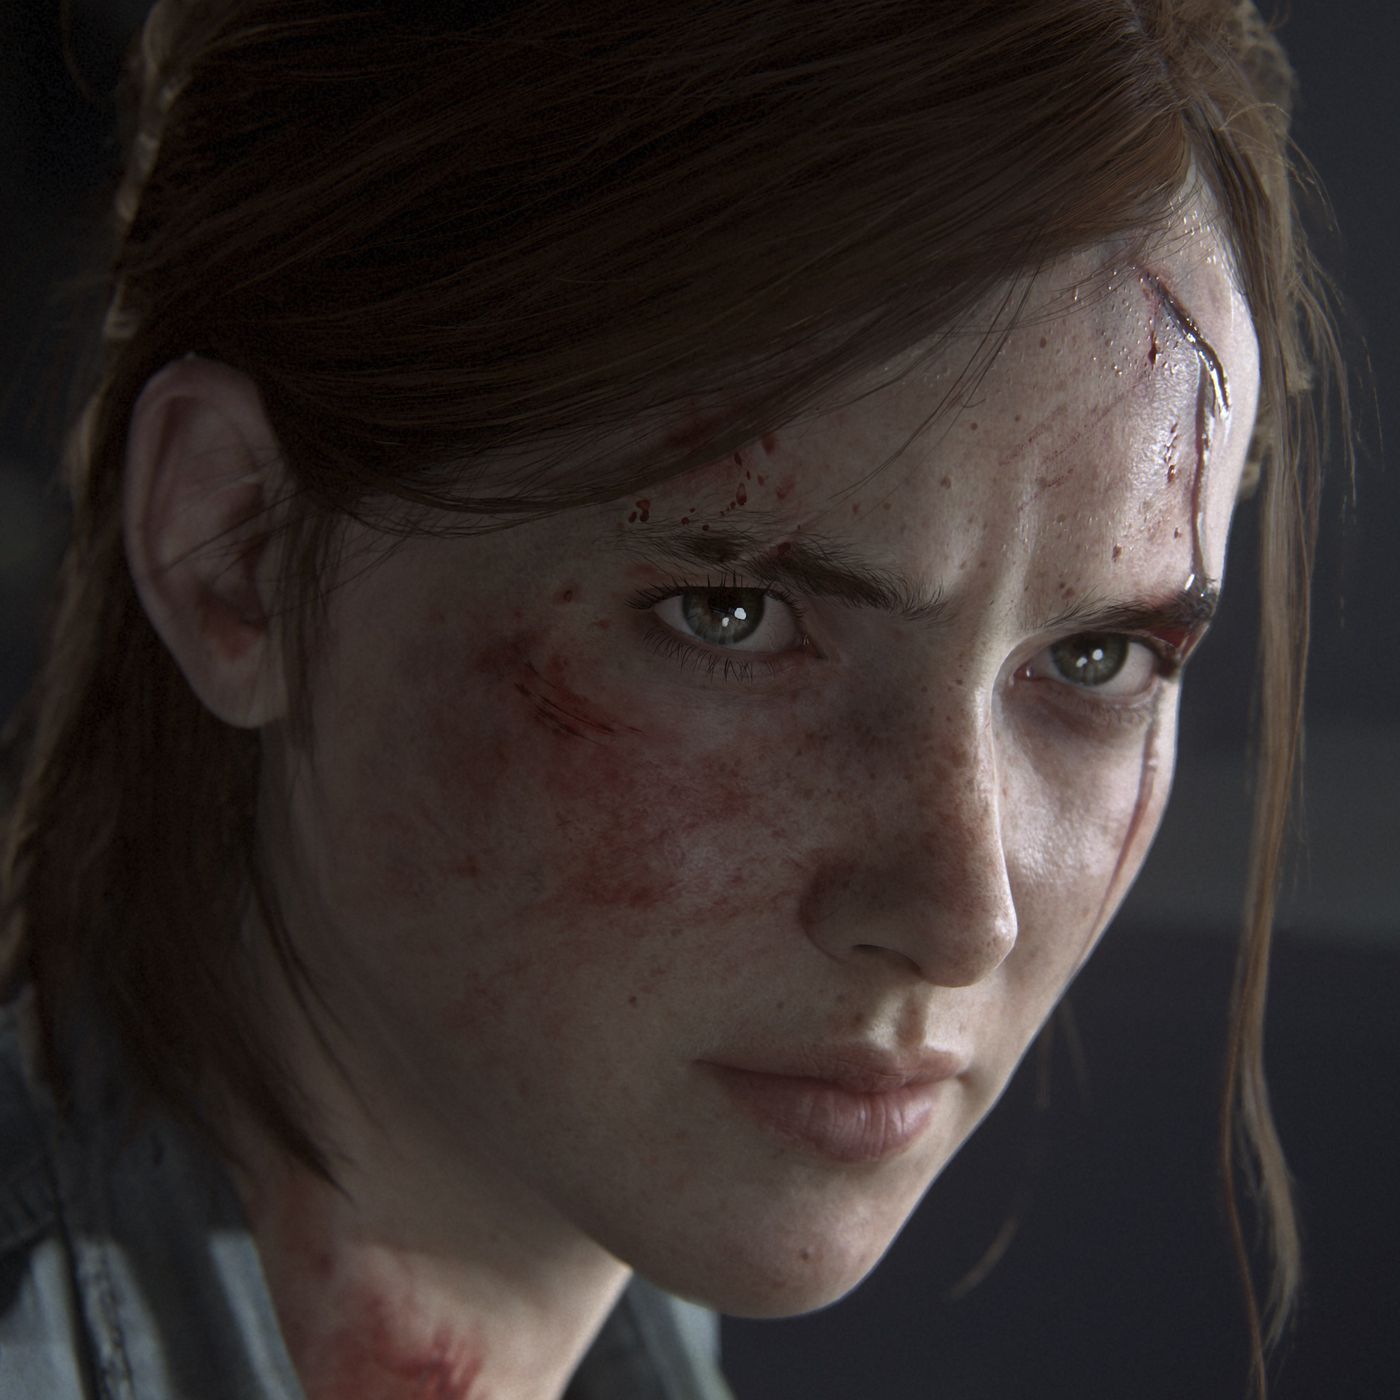 The Last of Us Part 2 review: We're better than this